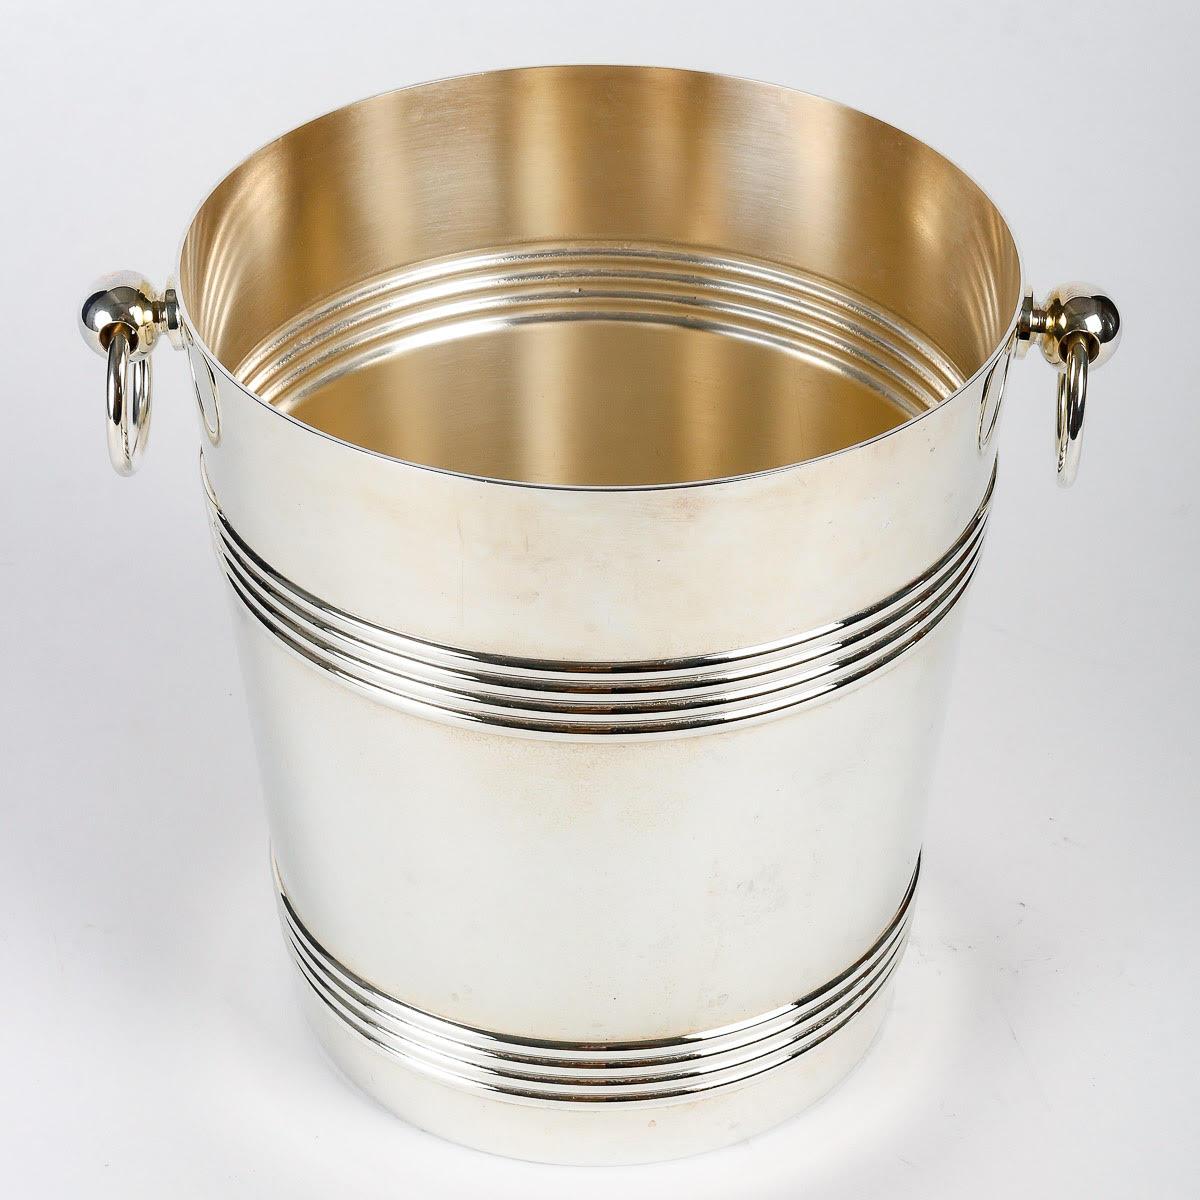 20th Century Silver-Plated Metal Ice Bucket by Christofle.